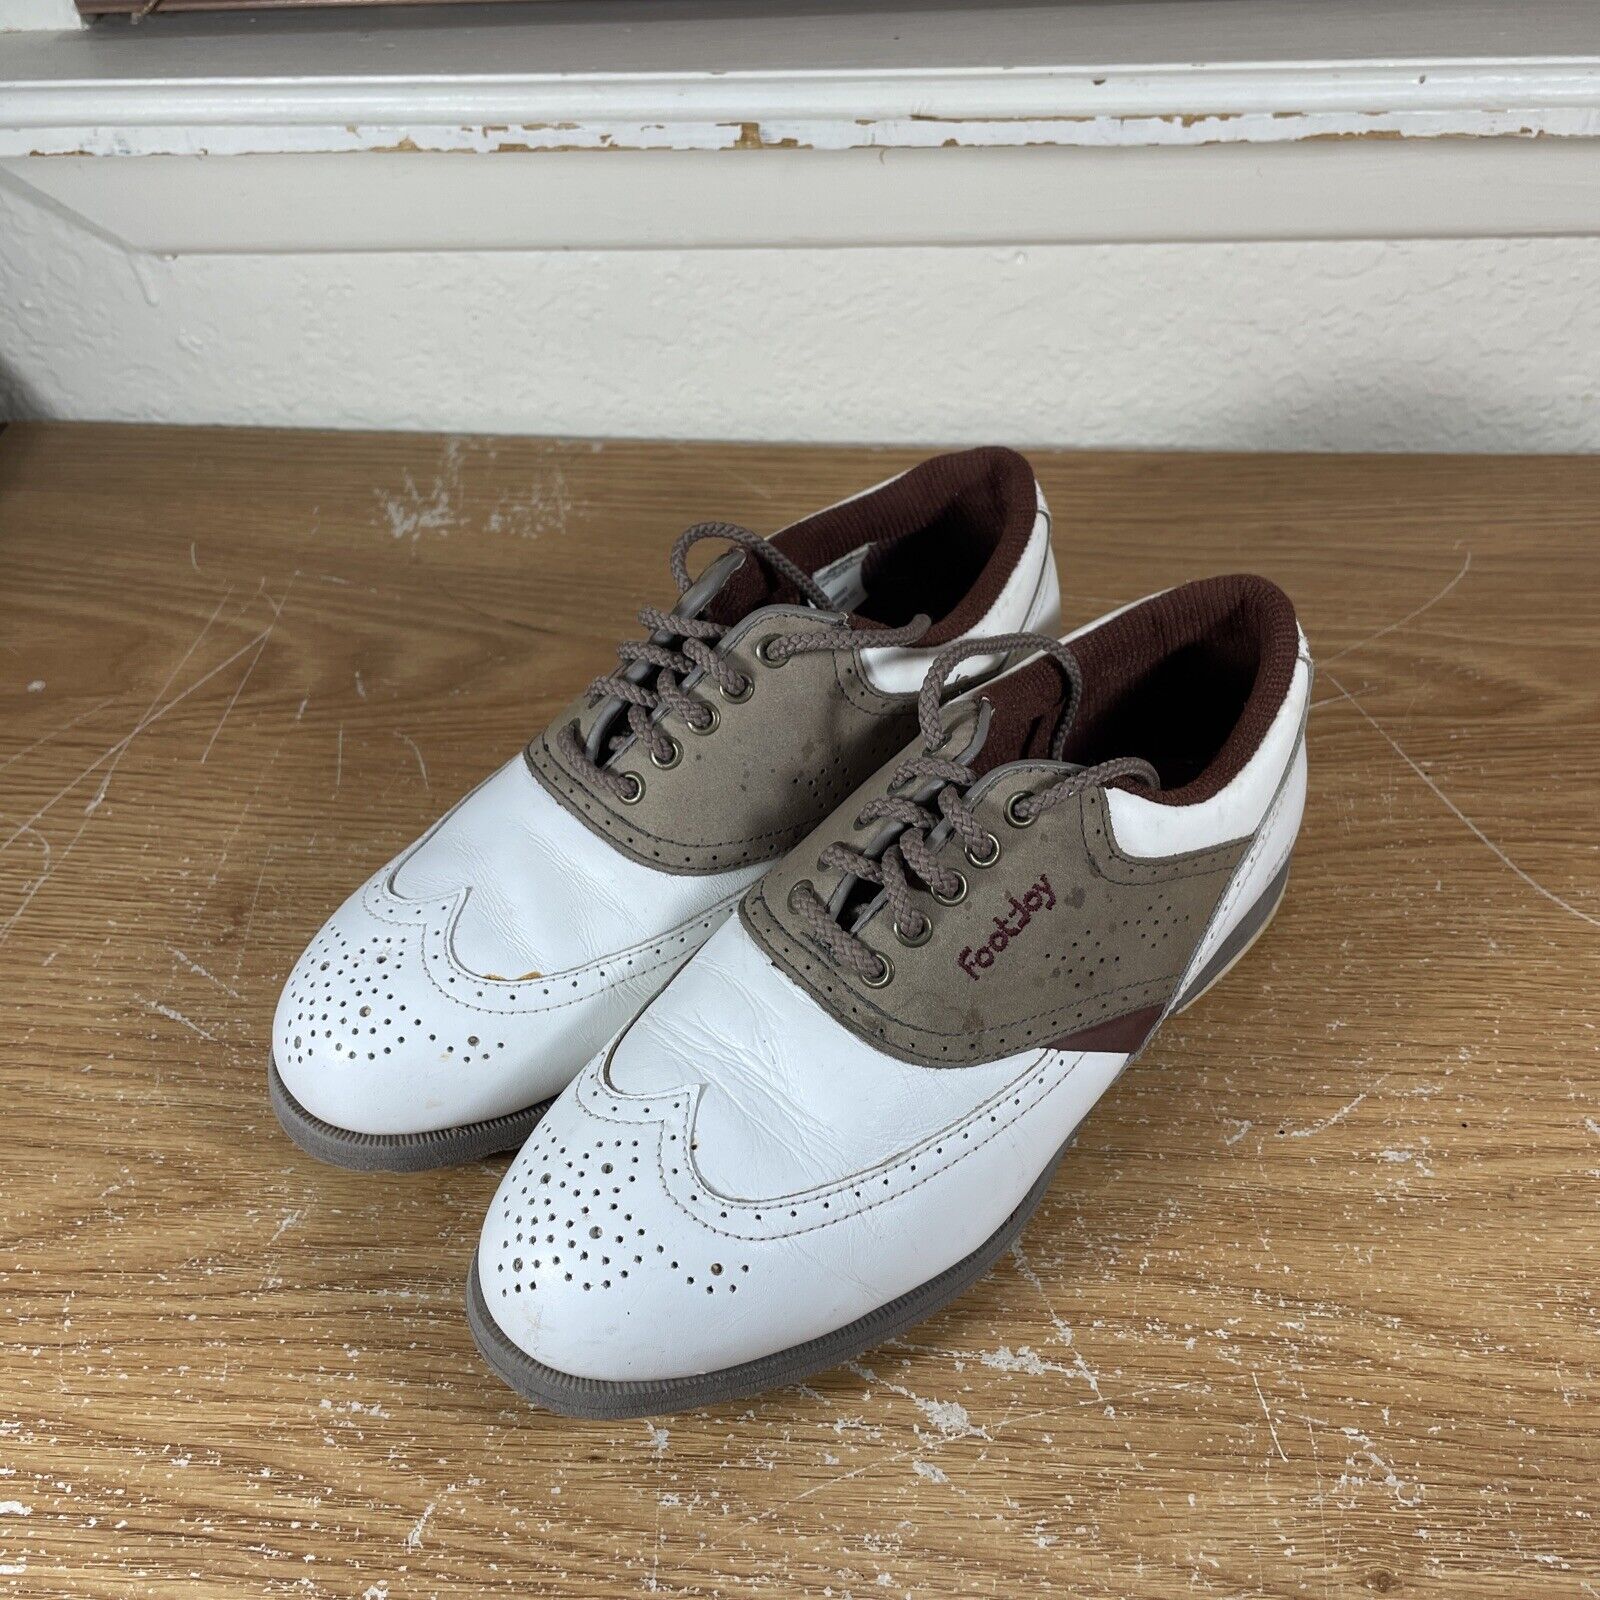 FOOTJOY Womens 6.5 W TCX Golf Shoes S White Factory outlet Leather #98208 Brown Phoenix Mall